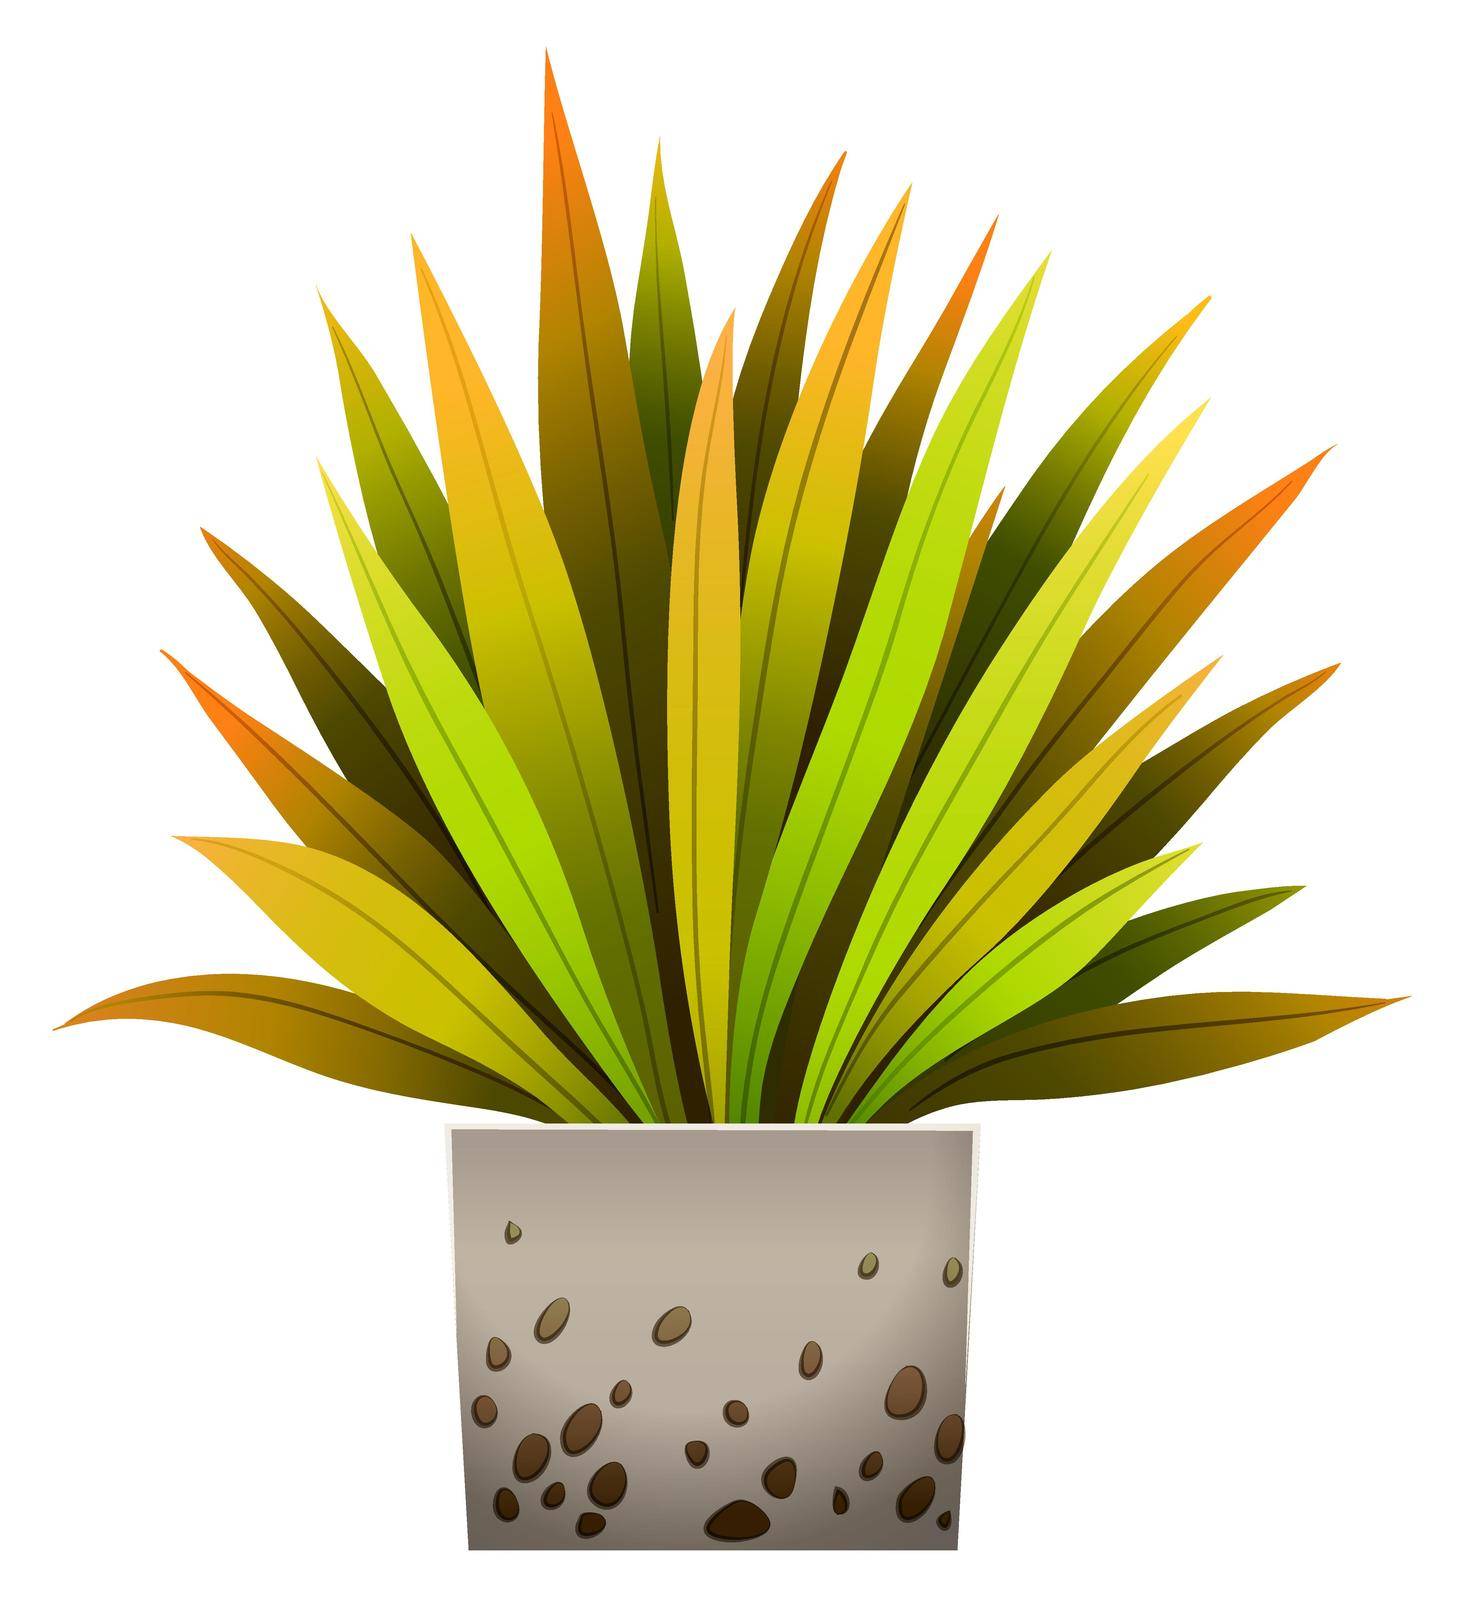 A decorative plant by iimages